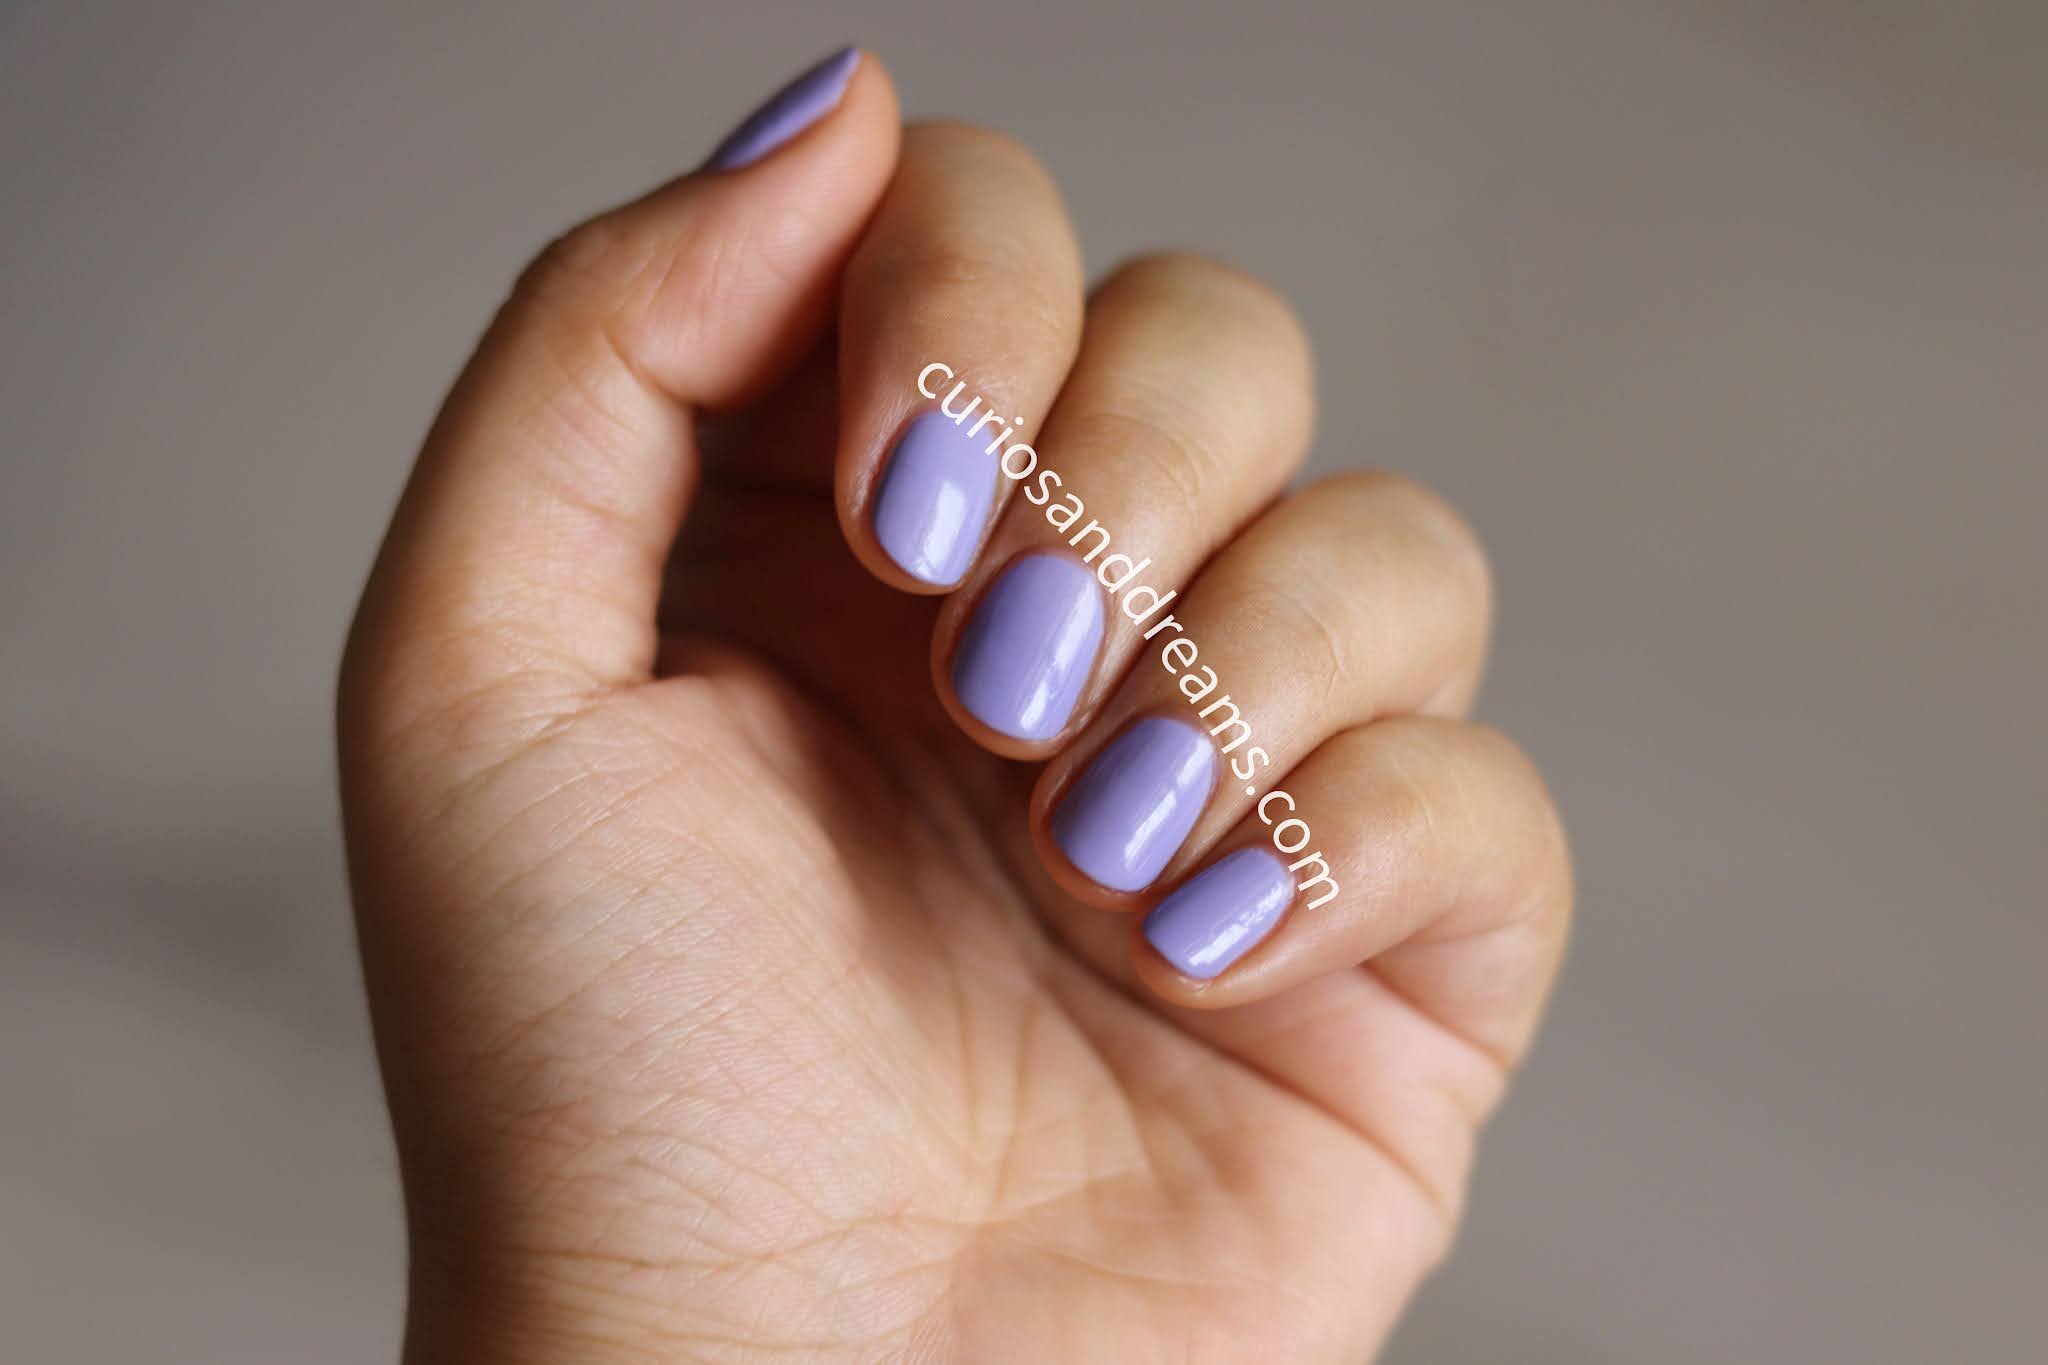 3. OPI Infinite Shine Nail Polish in "You're Such a Budapest" - wide 9